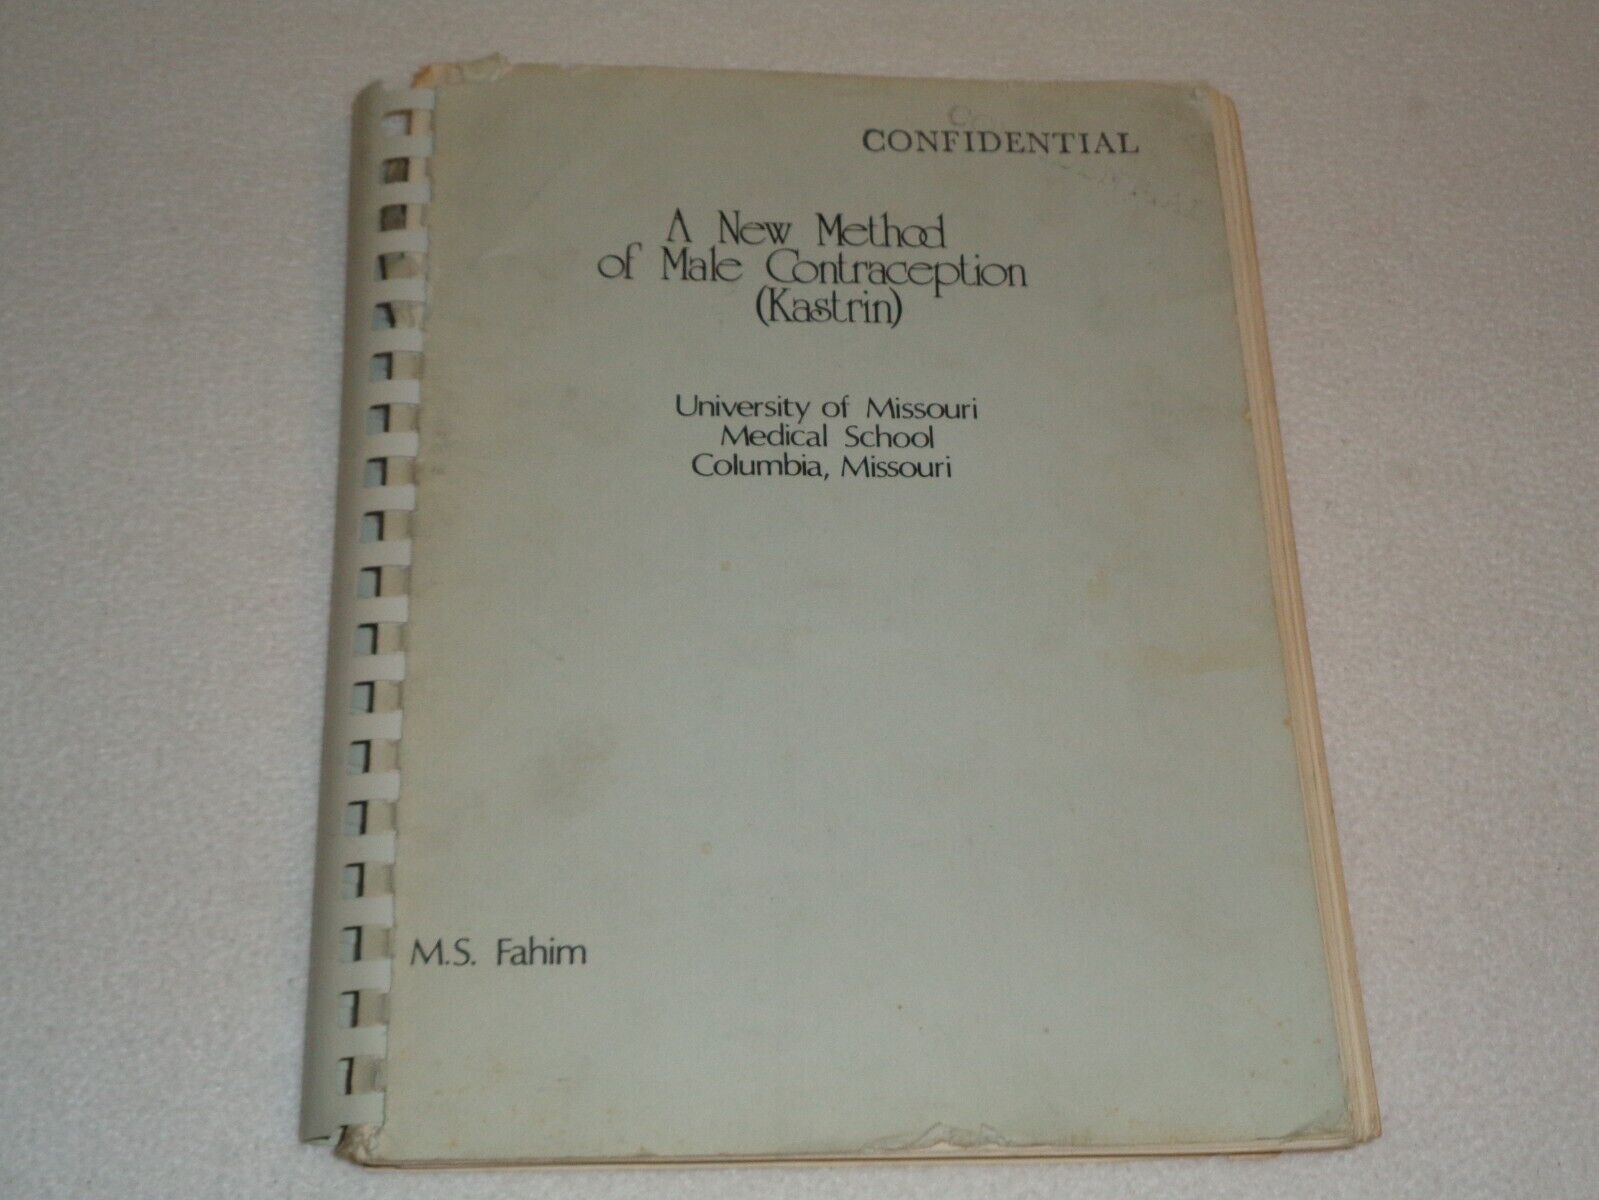 A New Method of Male Contraception 1977 Confidential Publication Animal Testing